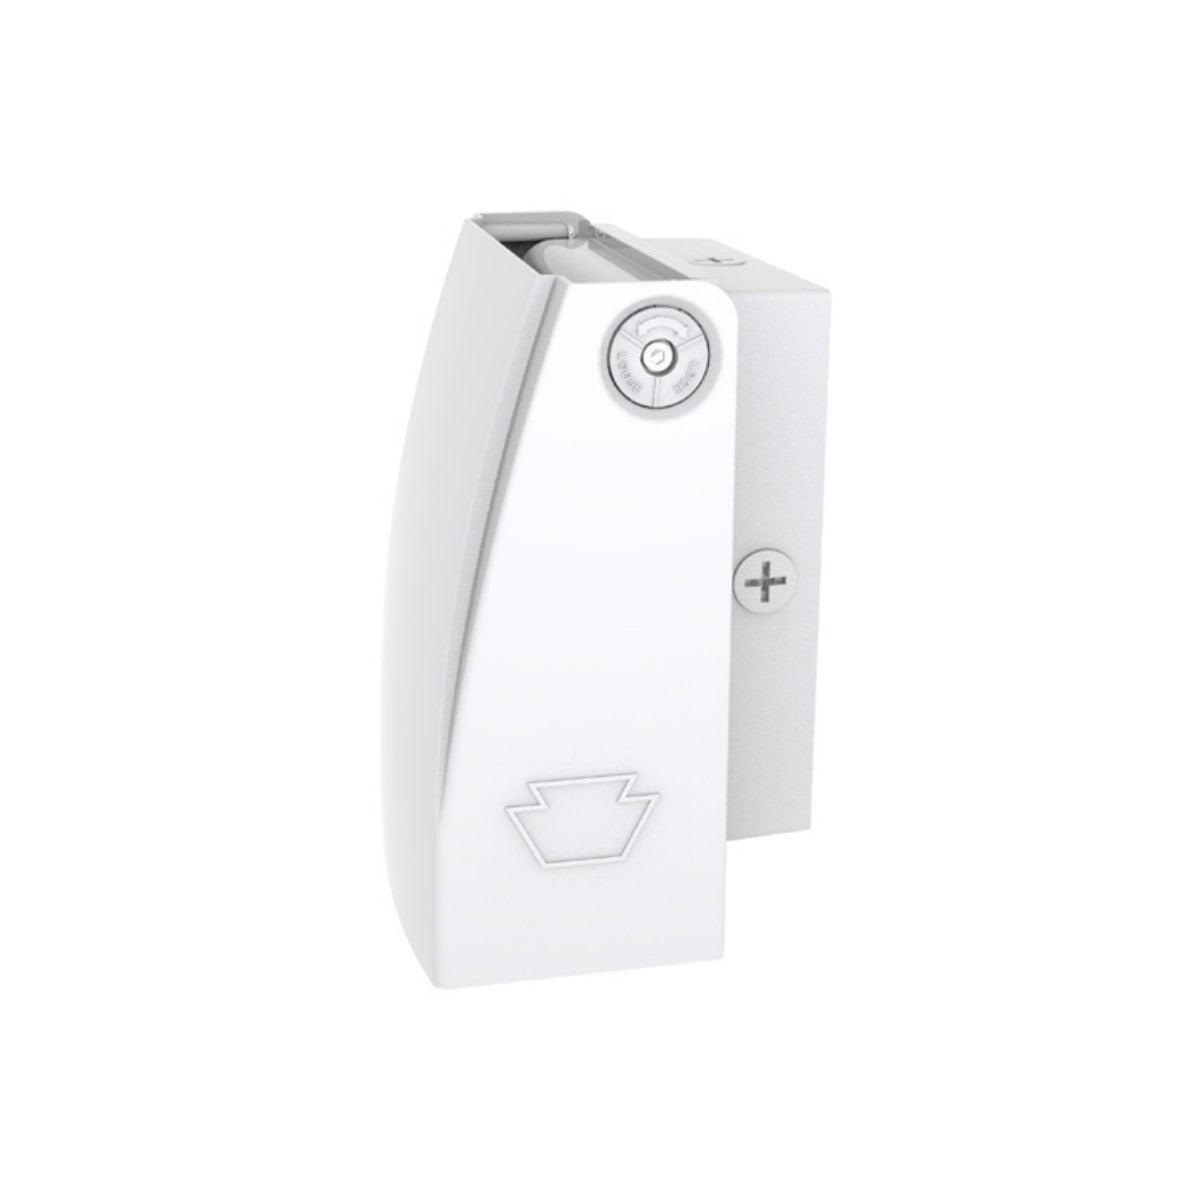 Adjustable Wall Pack with silver buttons and a logo. Provides 6975-10875 lumens of CCT tunable white light. Power and color select technology. Illuminate hard-to-reach areas with 90˚ angle adjustment in 15 positions. Integrated photocell for dusk-to-dawn lighting. Keystone Technologies brand.